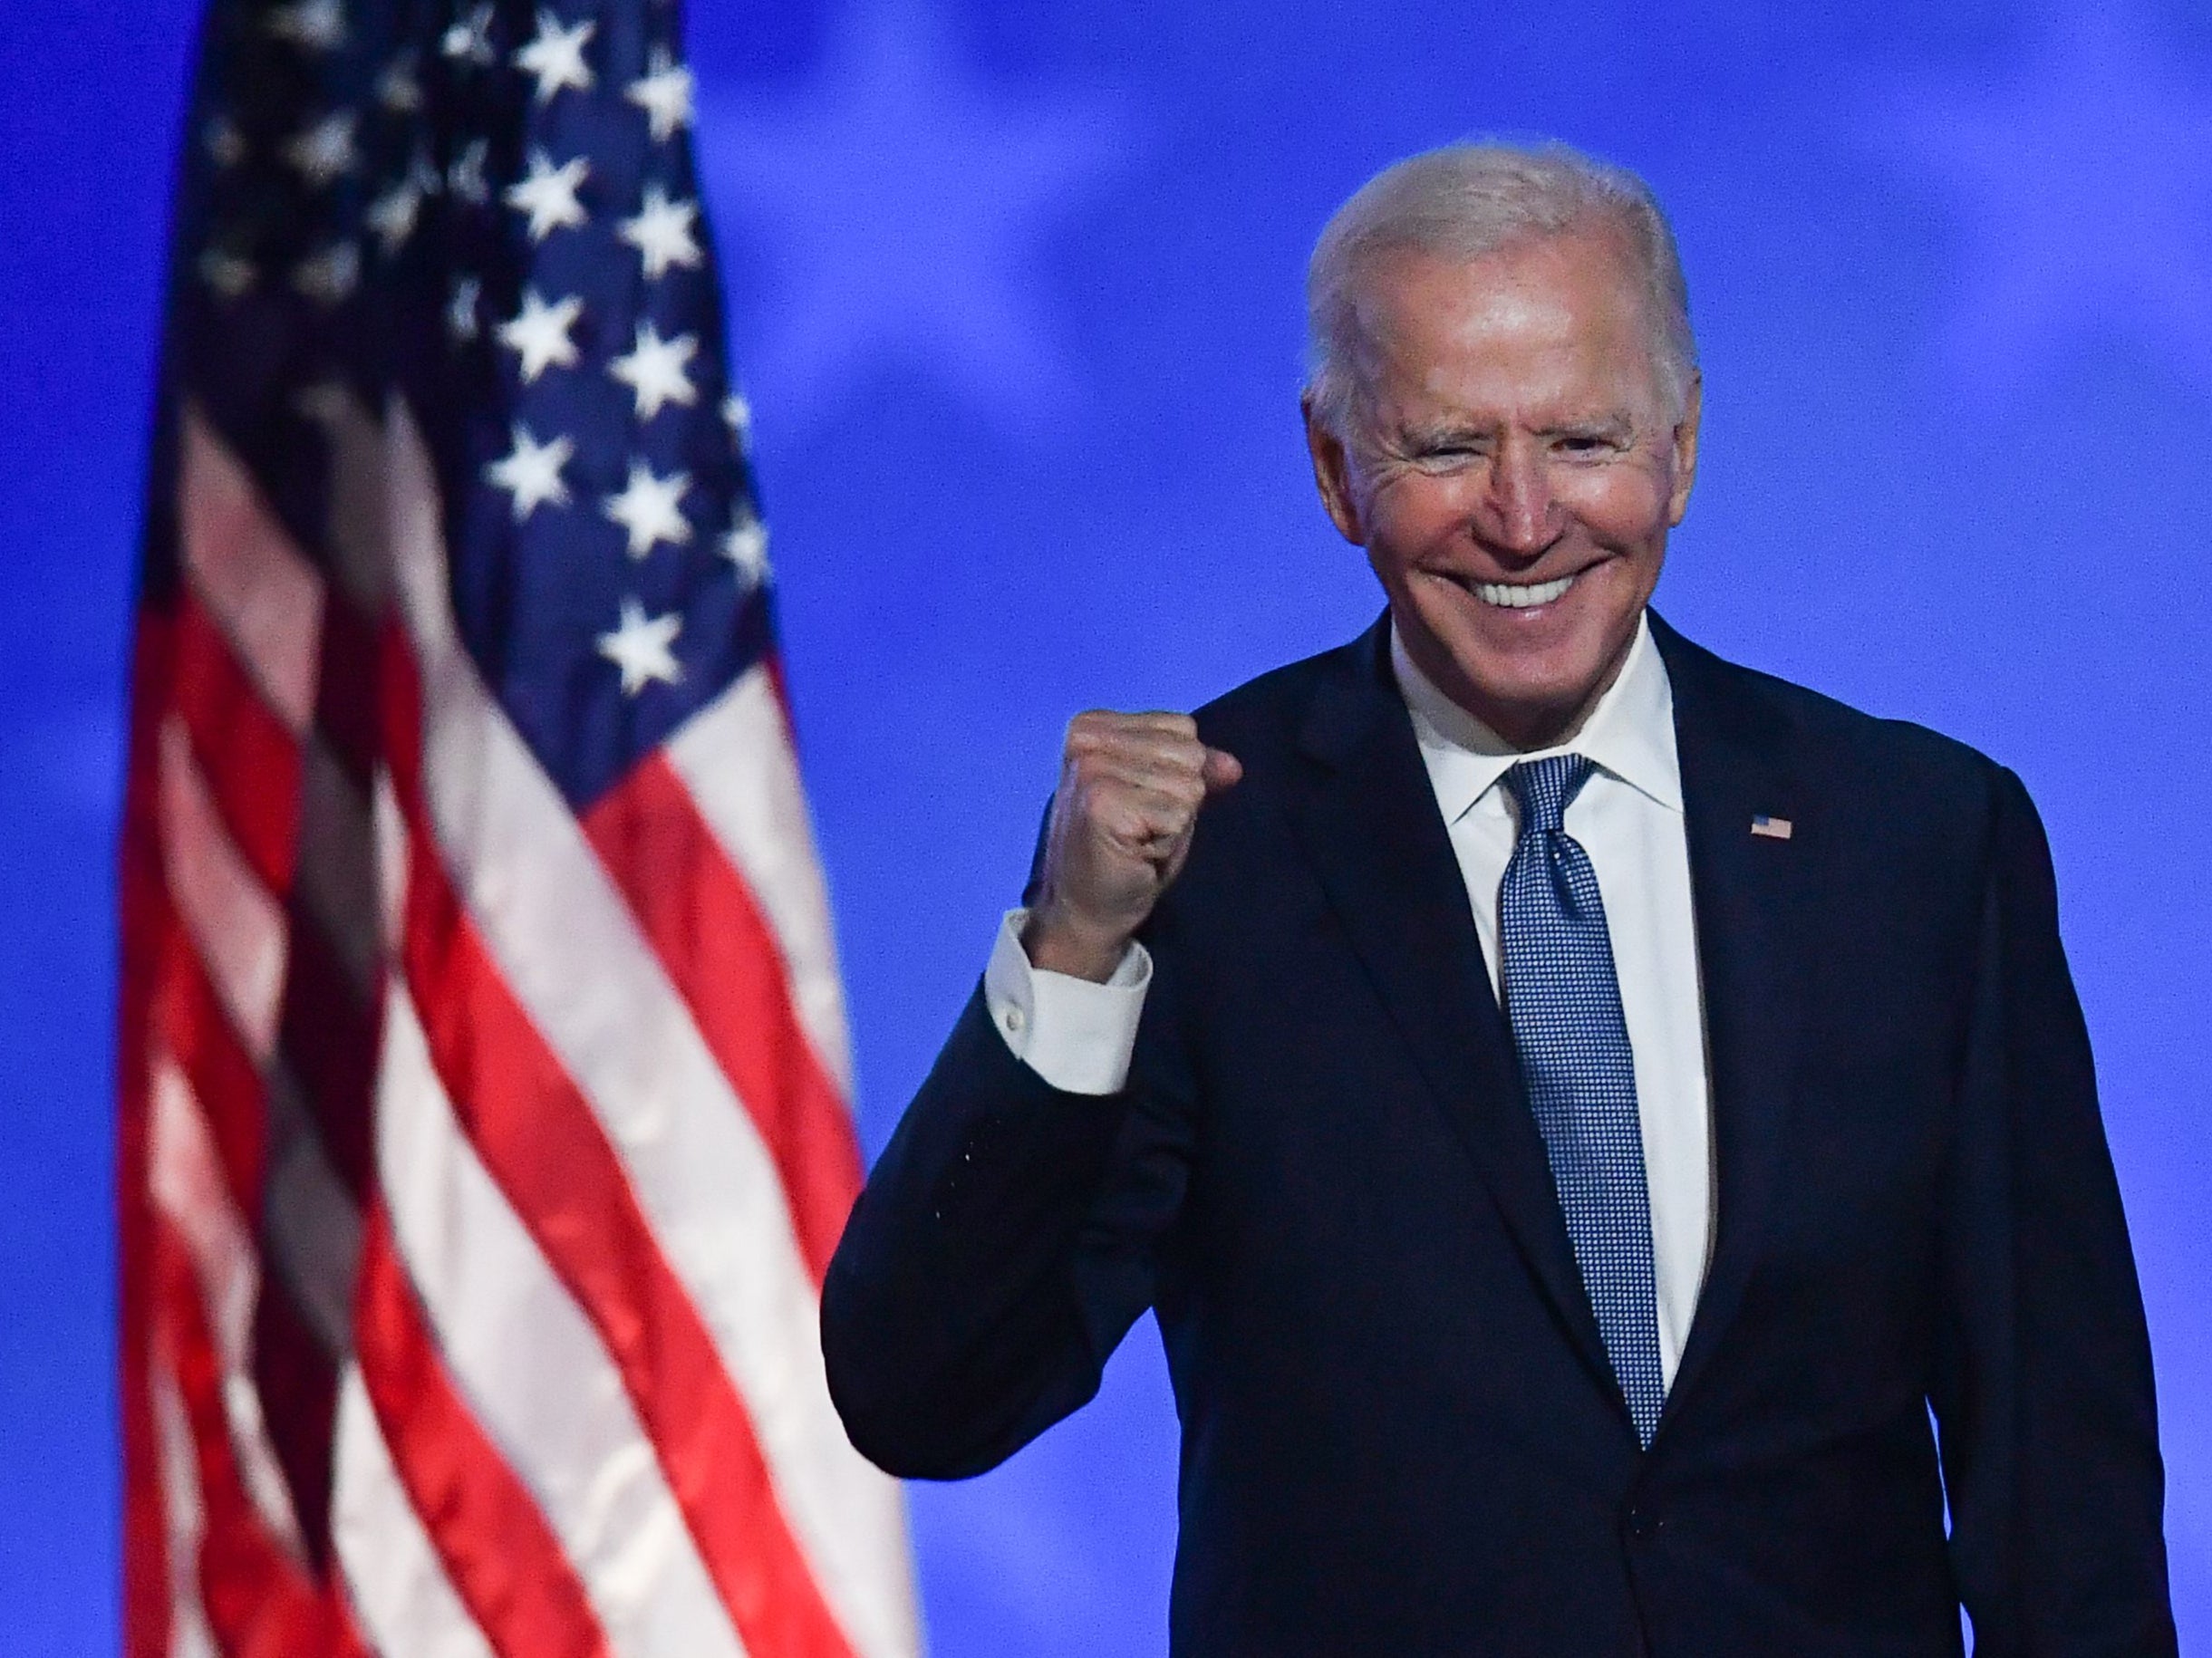 Joe Biden gestures after speaking during election night at the Chase Center in Wilmington, Delaware, early on November 4, 2020. The Biden administration is planning on gathering 1,000 people at the White House for a Fourth of July event.